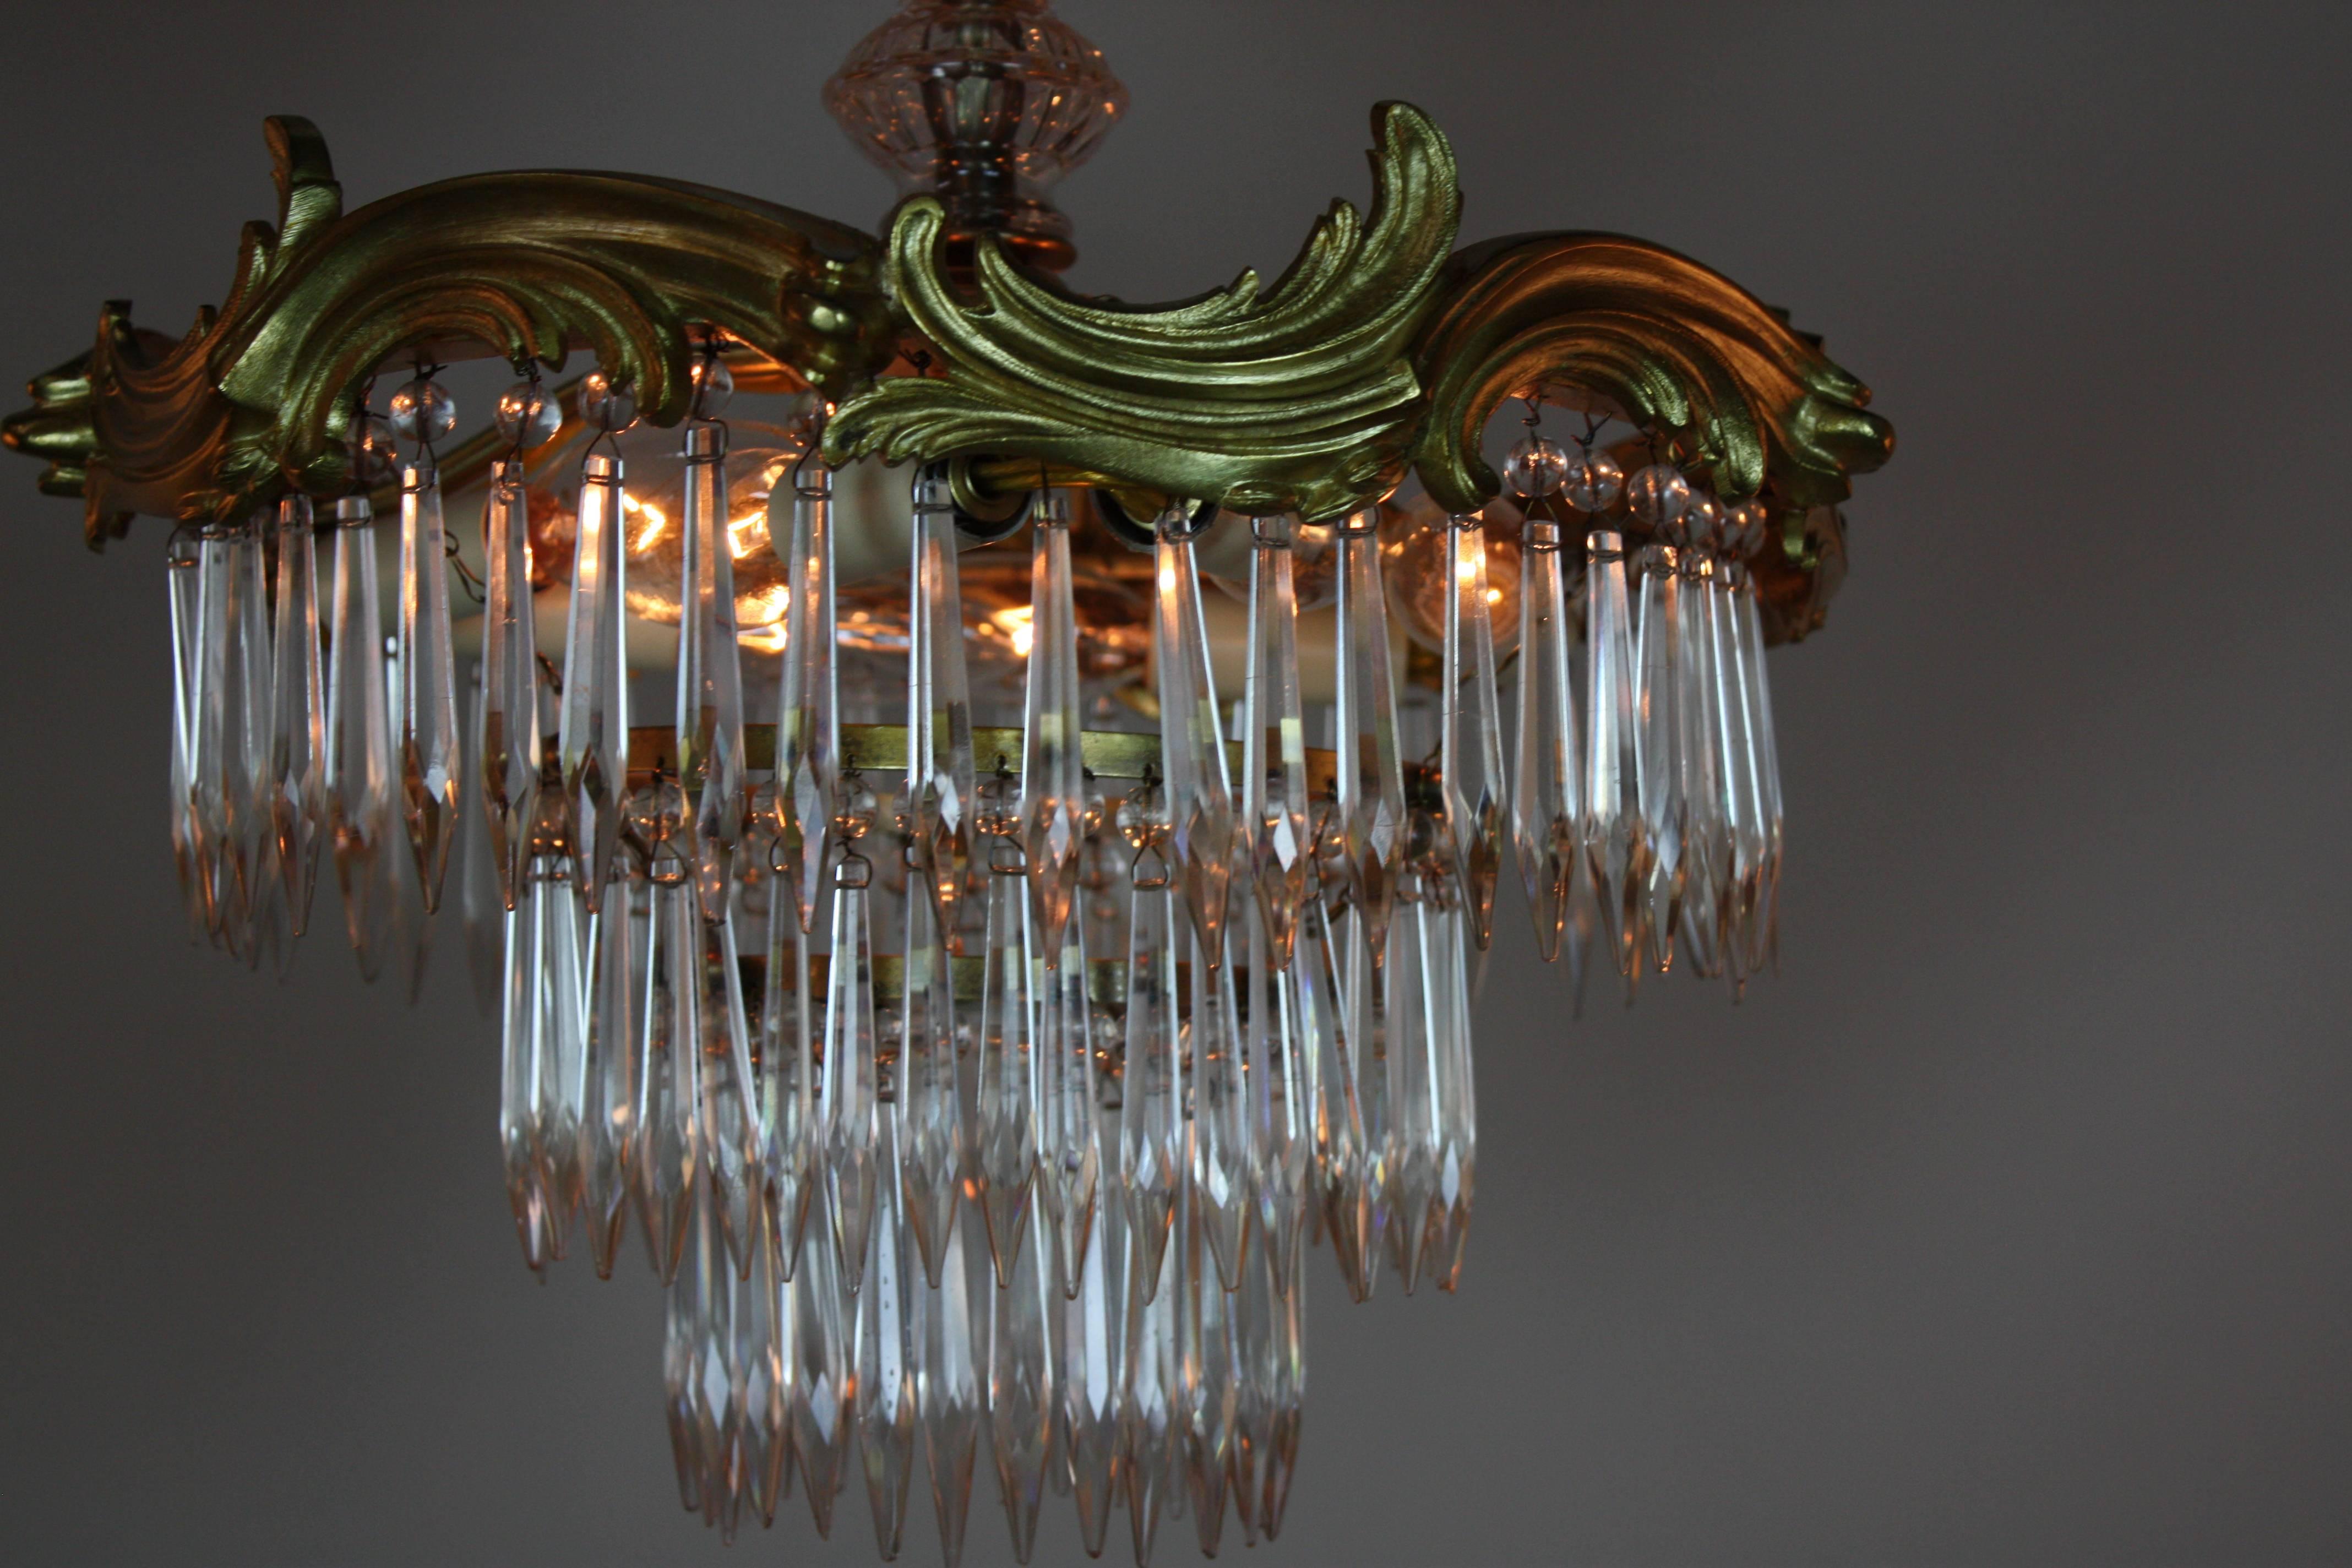 An elegant semi flush mount fixtures. Made of beautiful bronze and Classic crystal, these six light fixtures is filled from top to bottom with elegant detail.